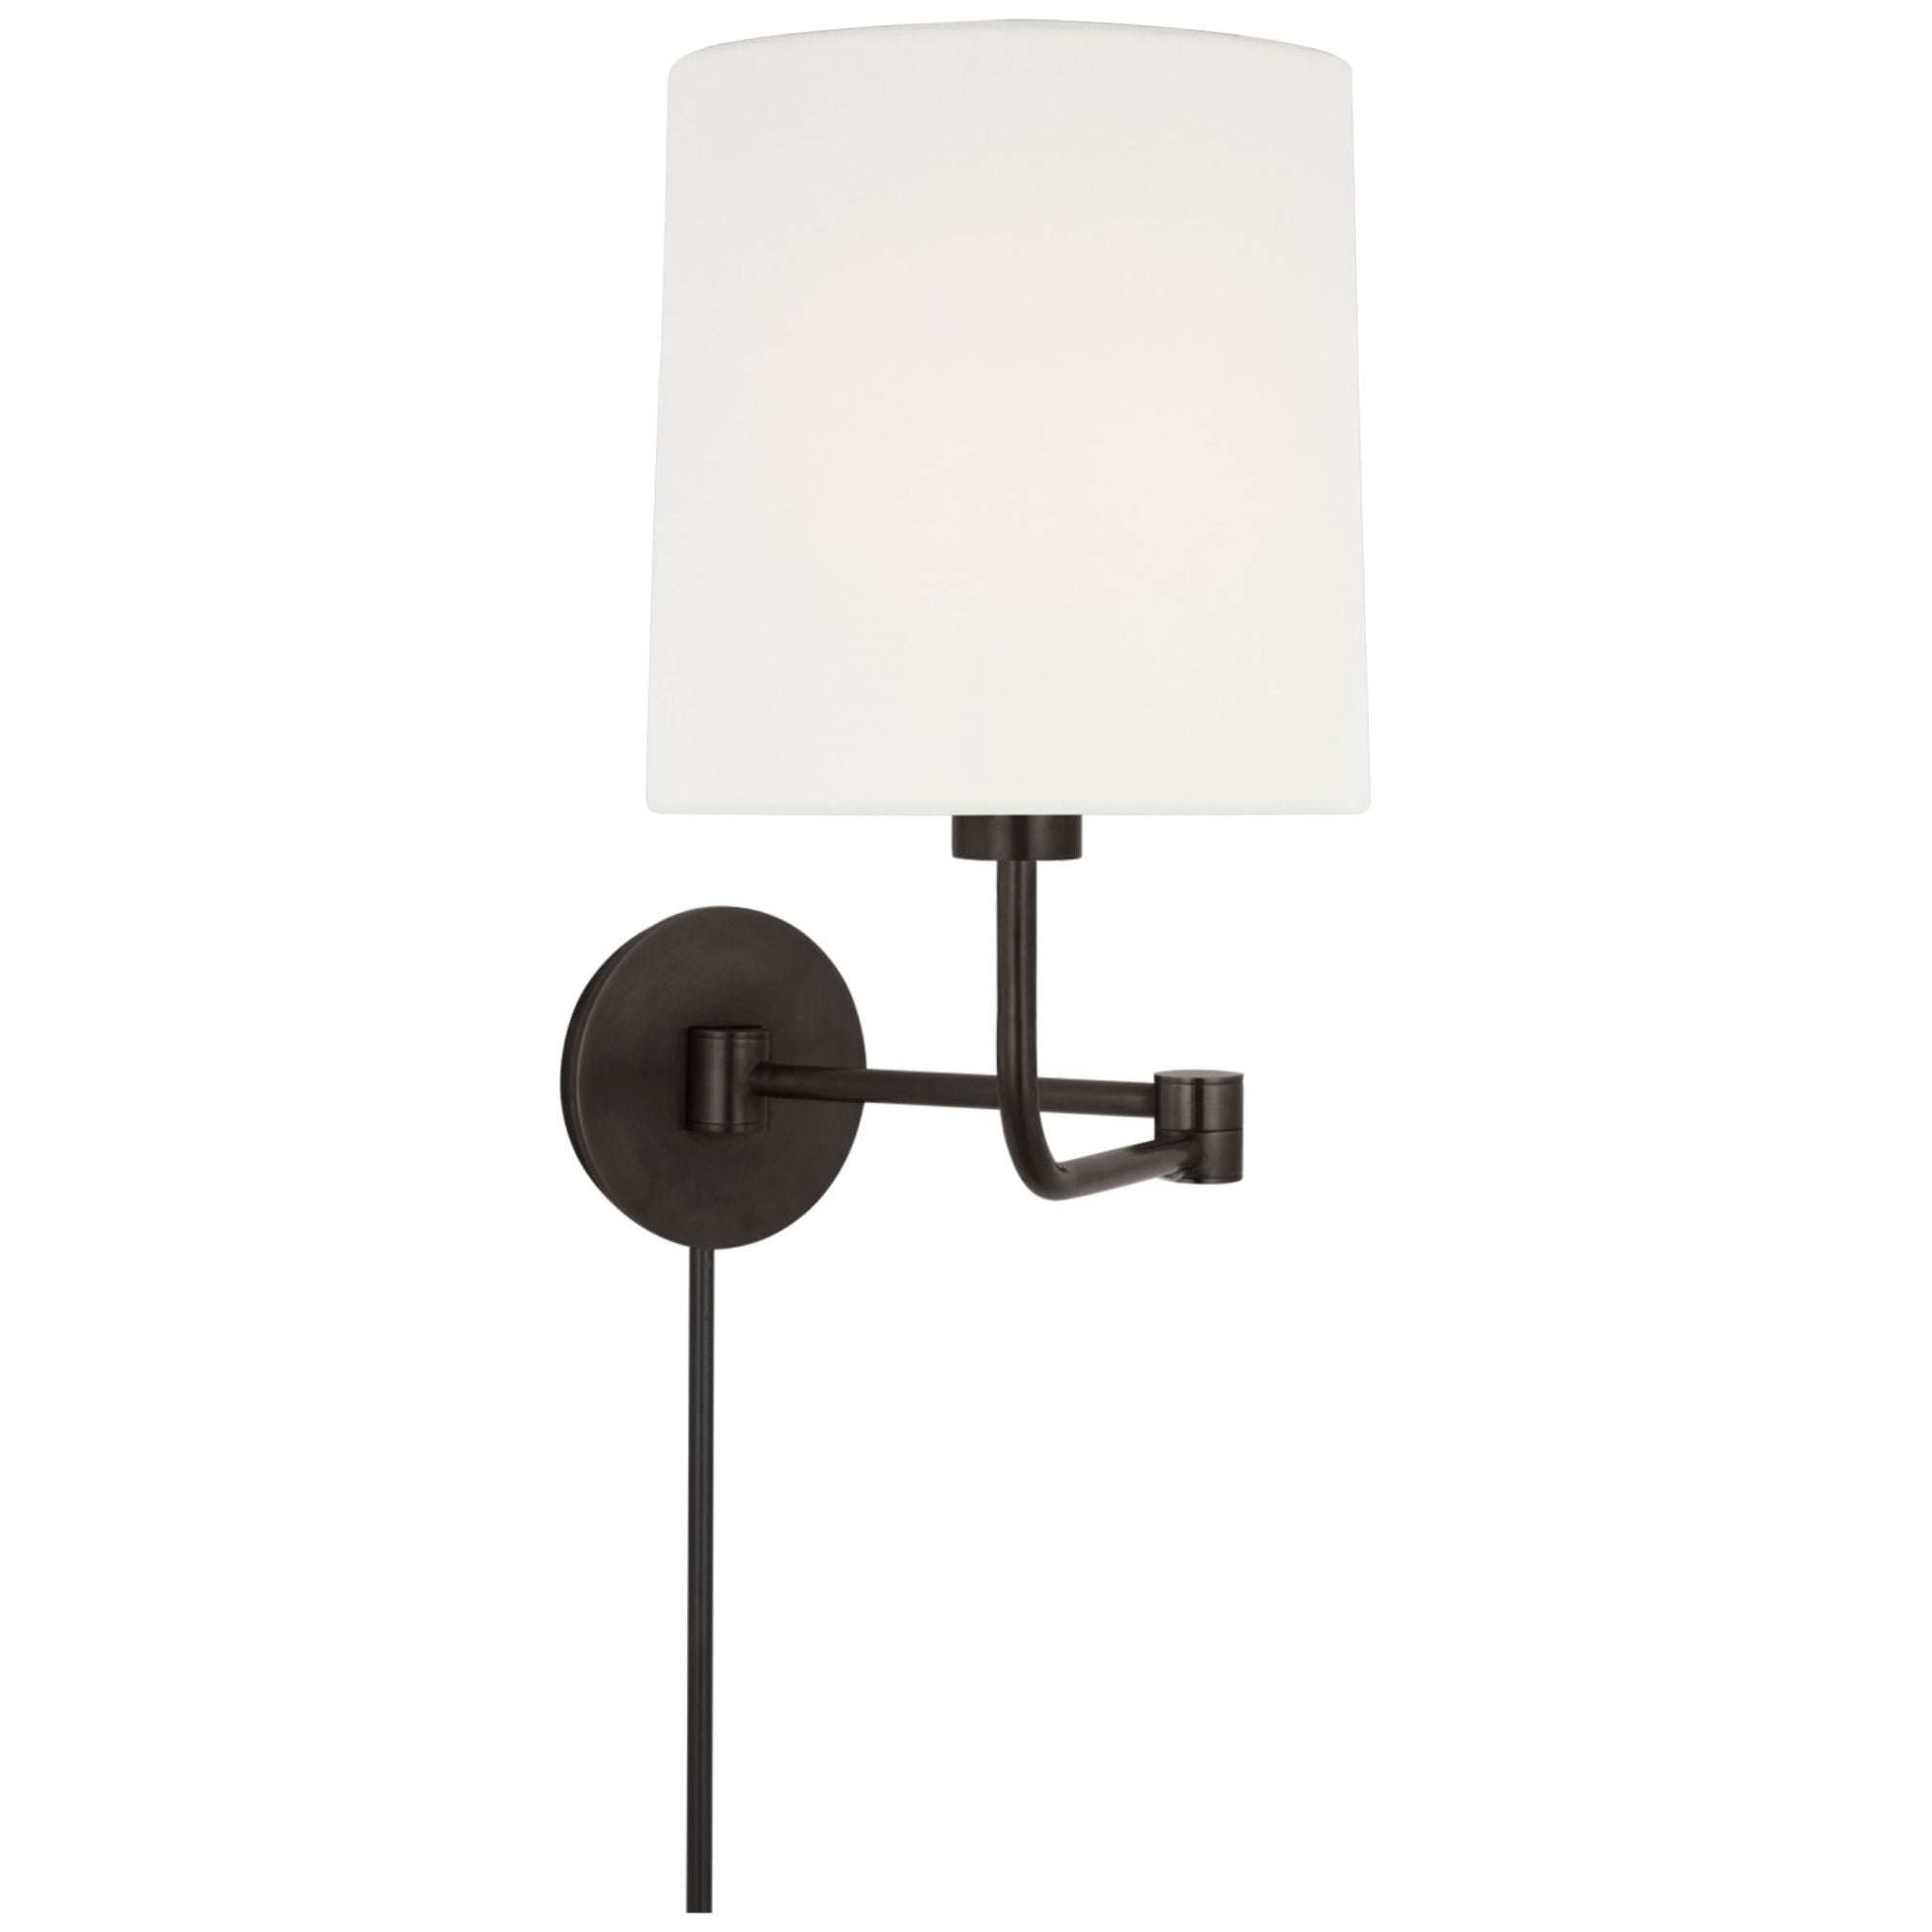 Barbara Barry Go Lightly Swing Arm Wall Light in Bronze with Linen Shade